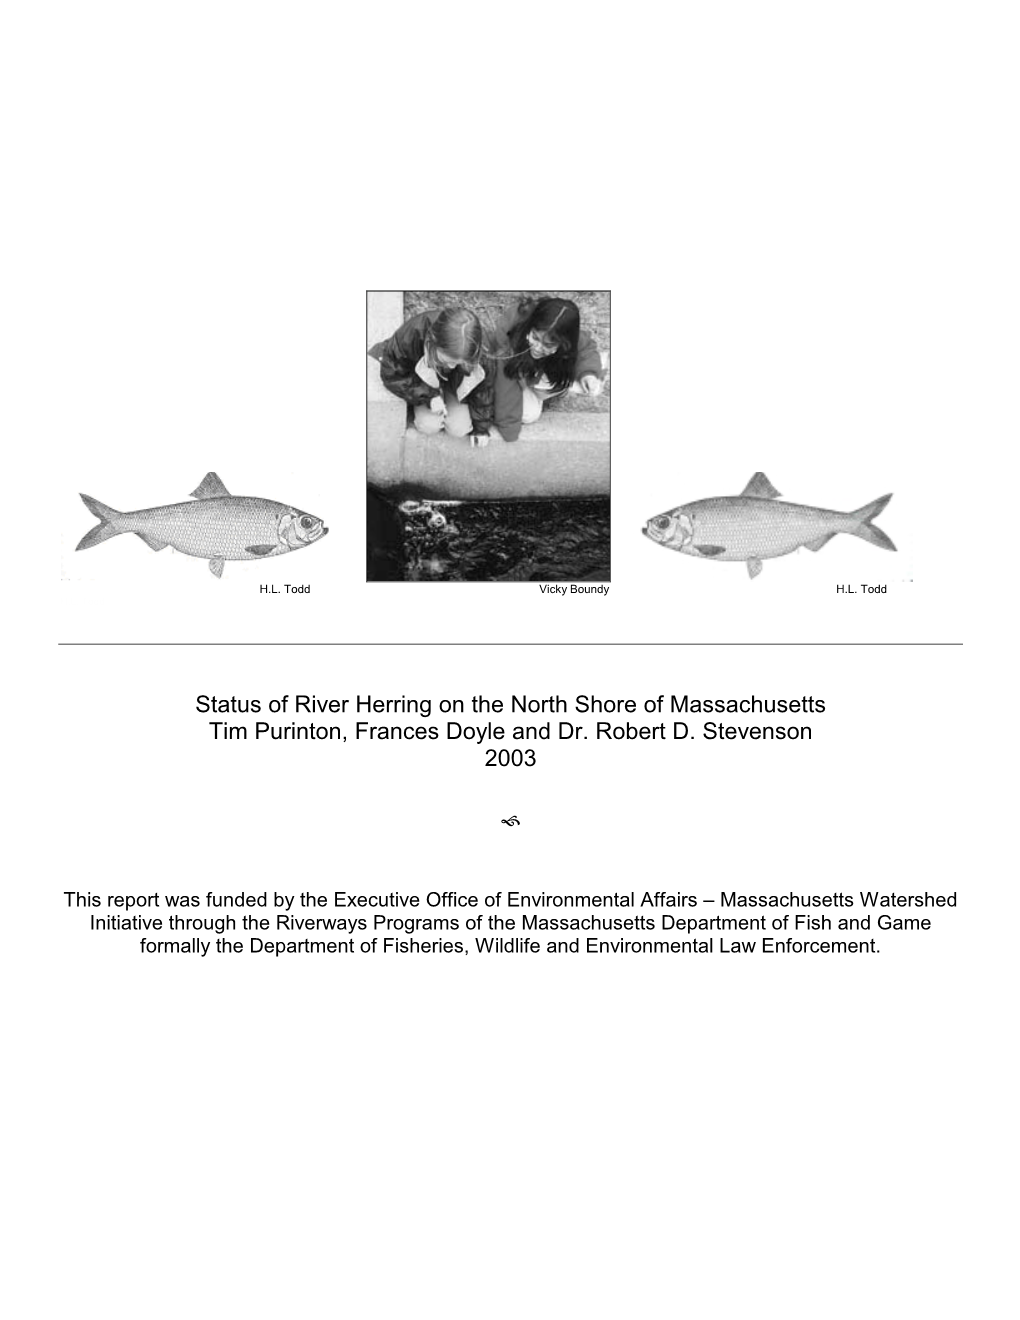 Status of River Herring on the North Shore of Massachusetts Tim Purinton, Frances Doyle and Dr